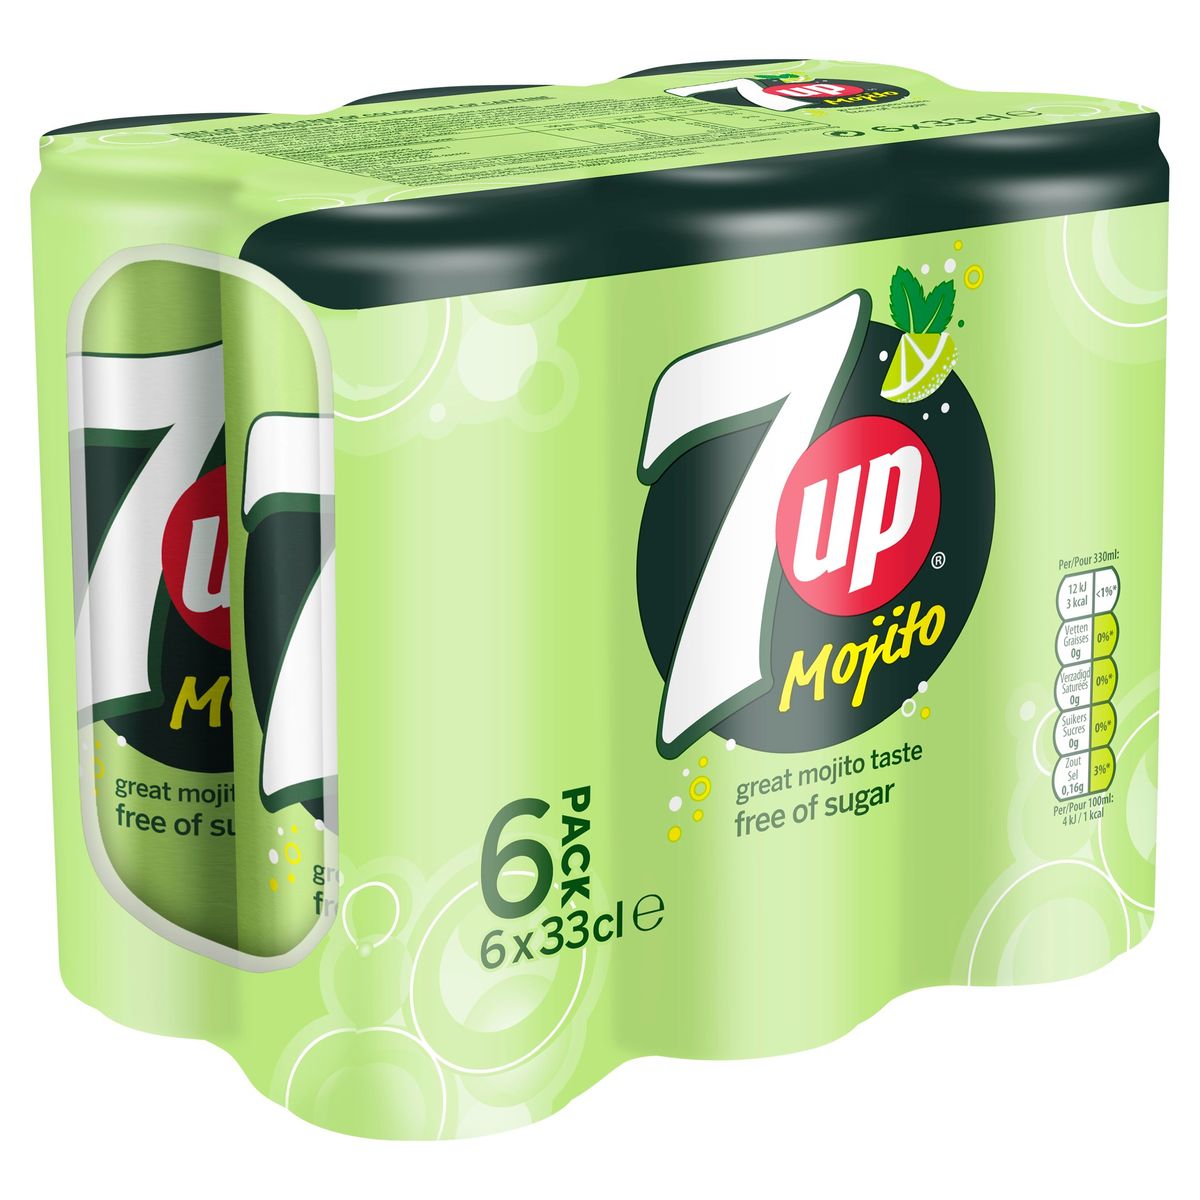 7UP Free Limonade Moijto 6 x 33 cl